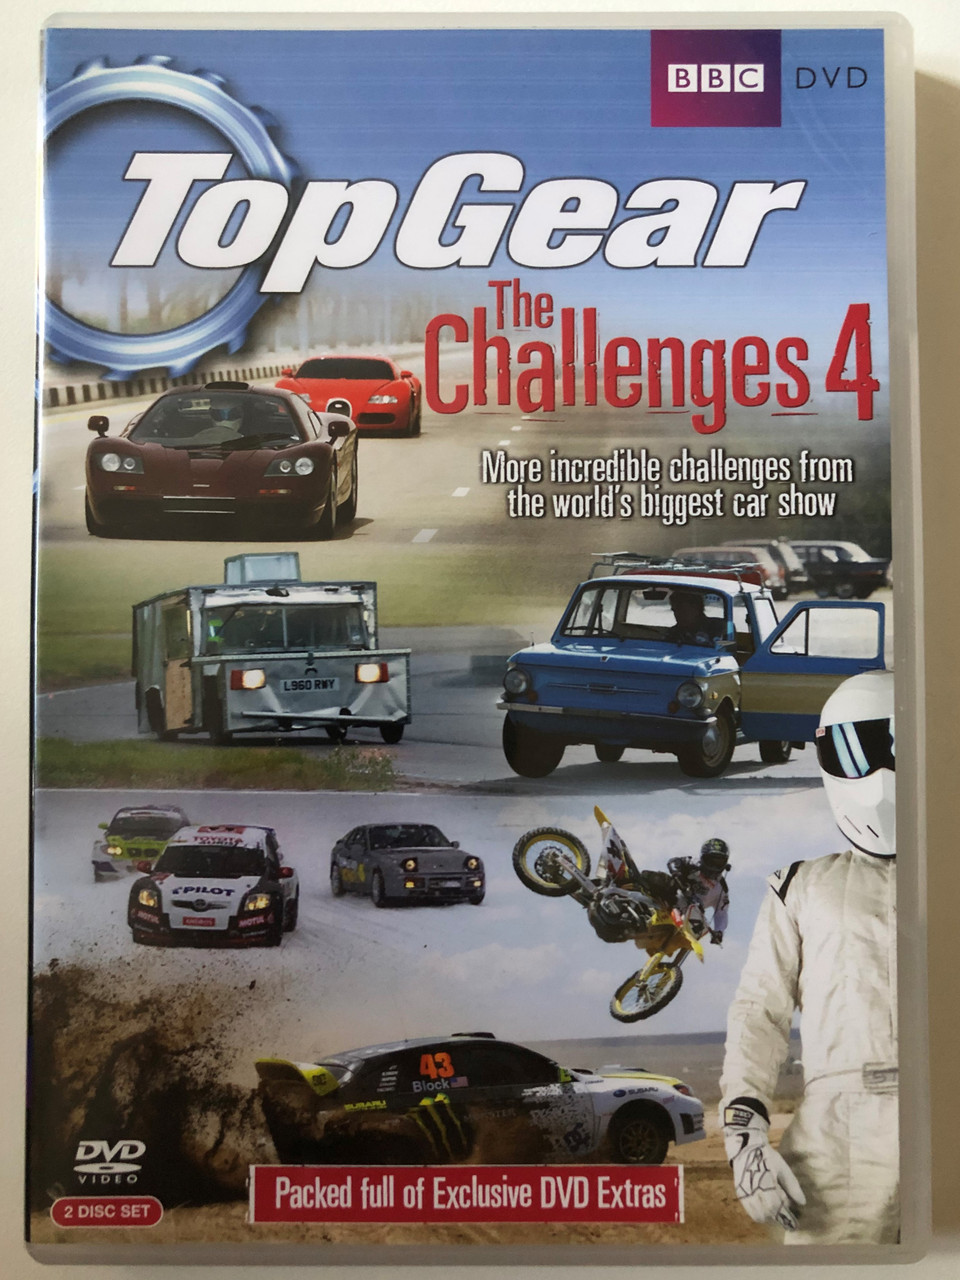 synd flyde over ribben Top Gear: The Challenges 4 / More incredible challenges from the world's  biggest car show / Packed full of Exclusive DVD Extras / BBC 2x DVD Video  CD 2010 / BBCDVD3193 - bibleinmylanguage